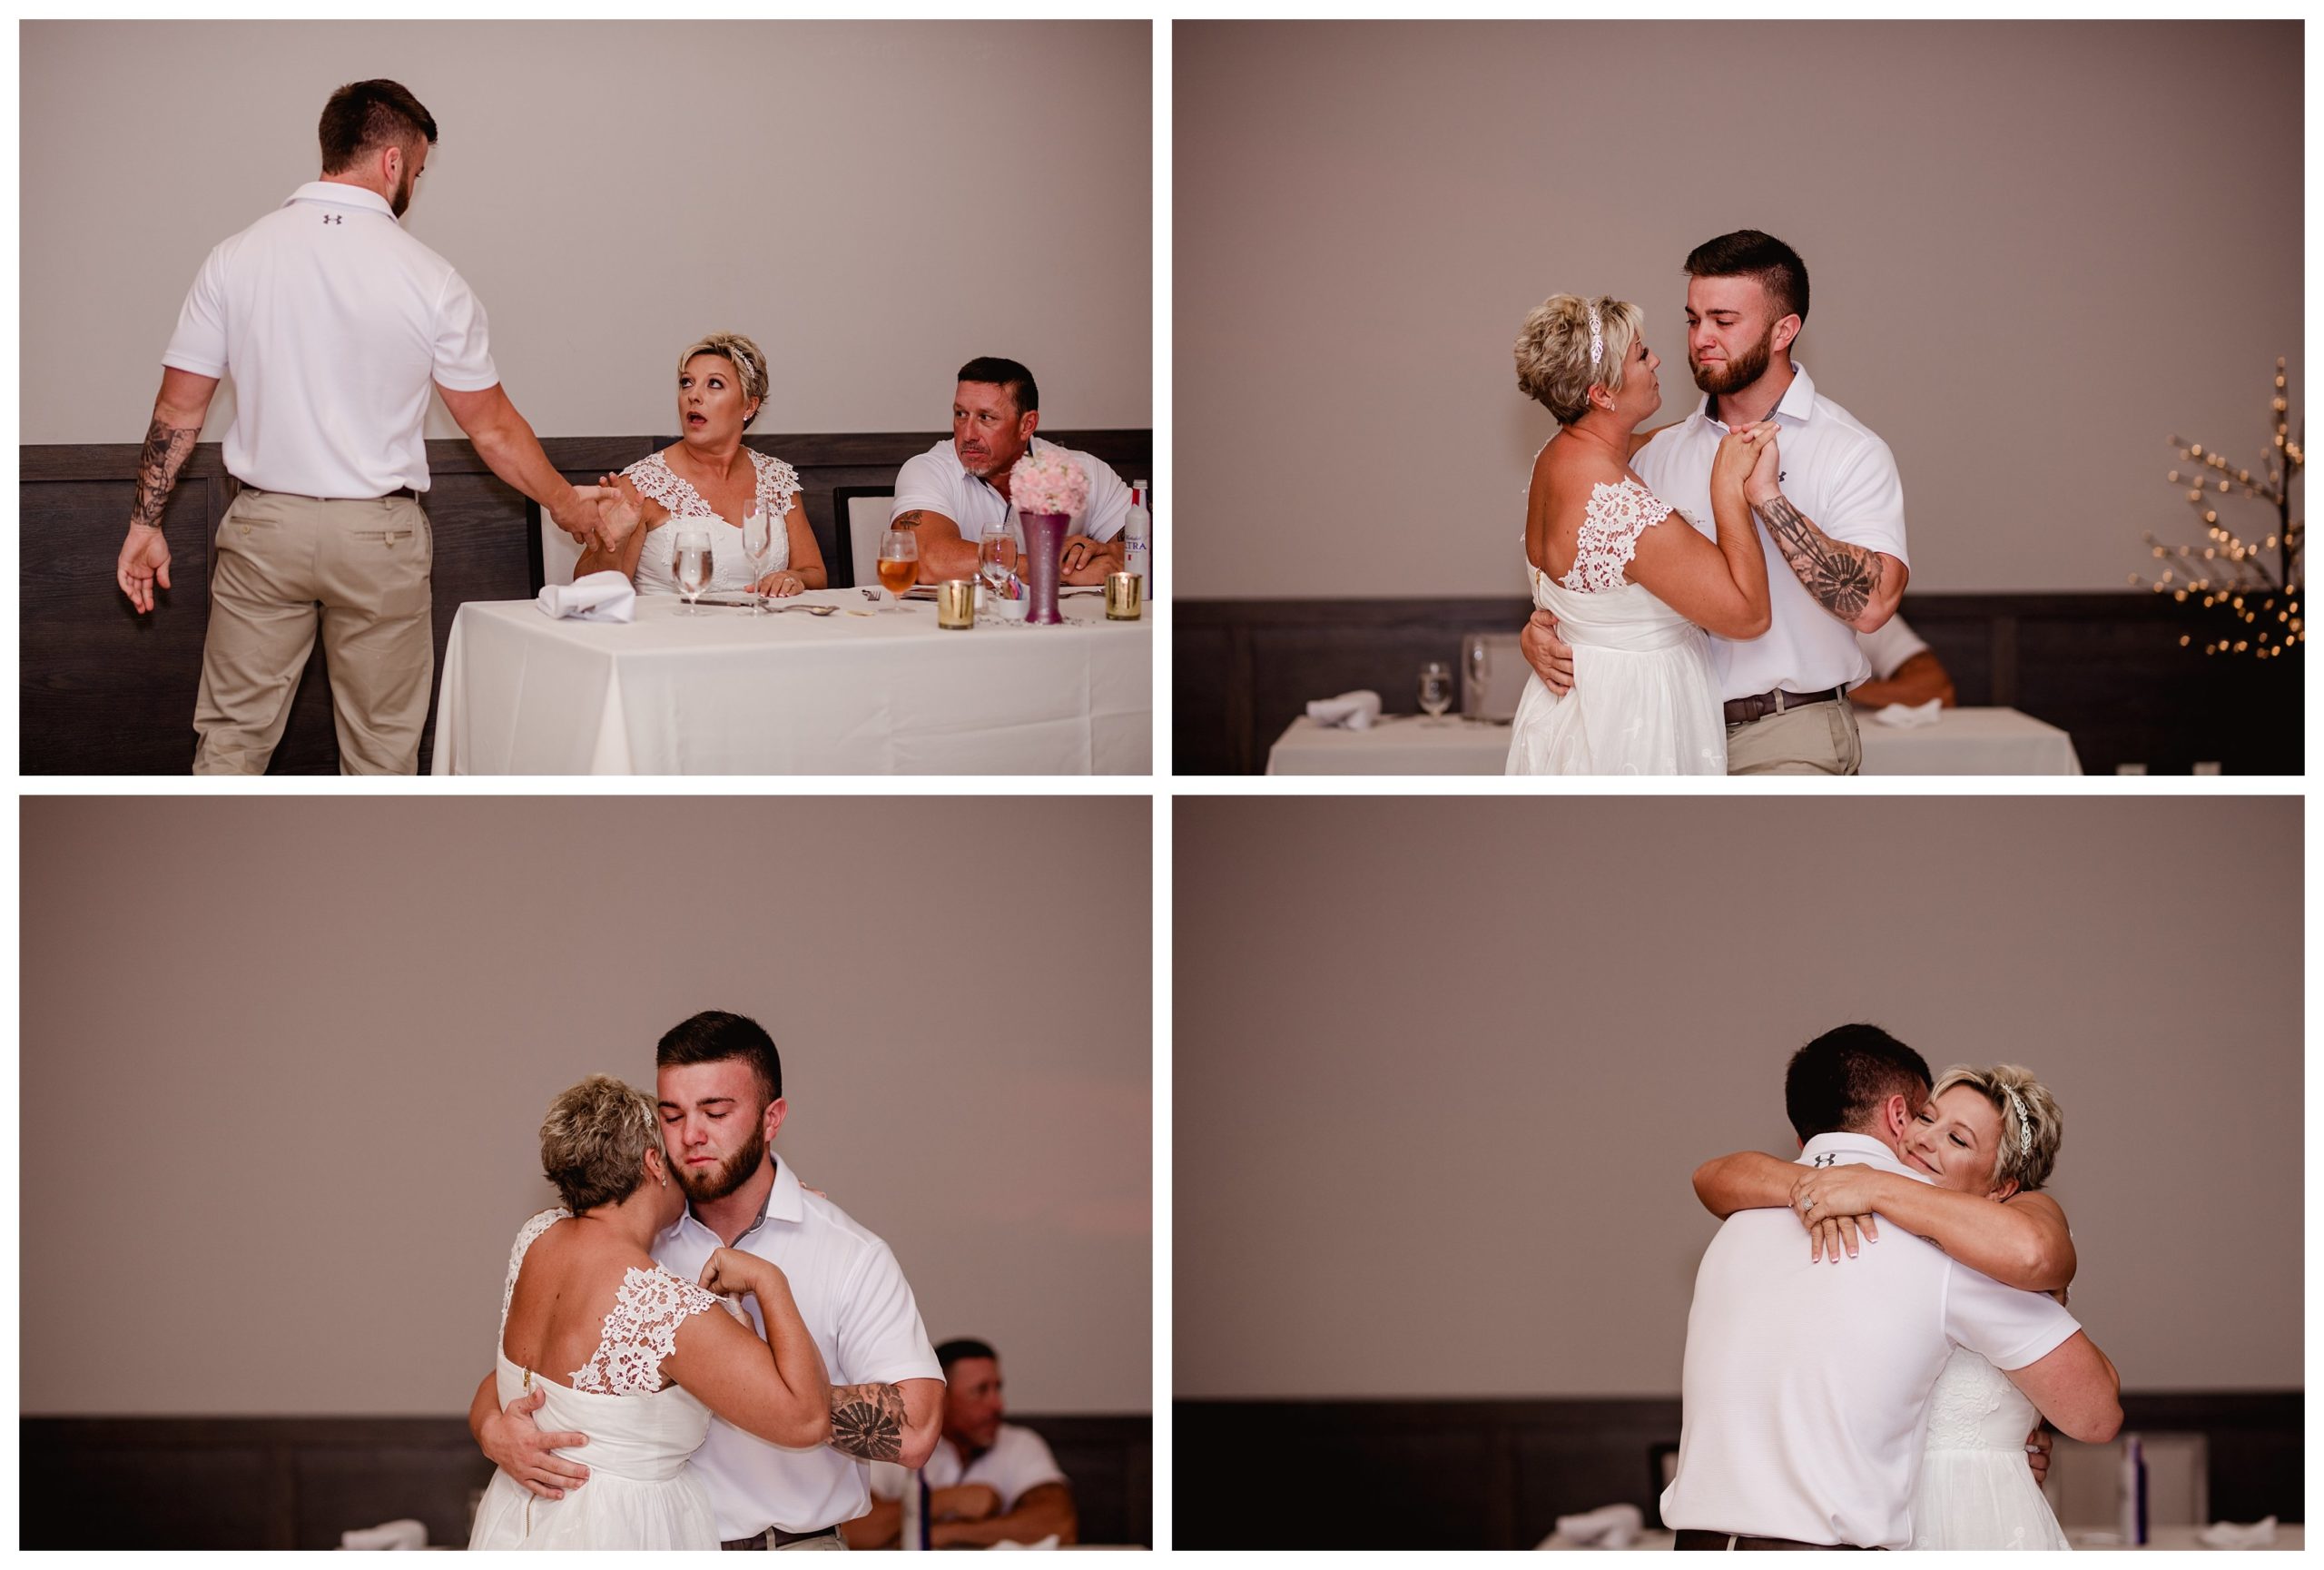 Special moment for the bride when her step son invites her to dance.